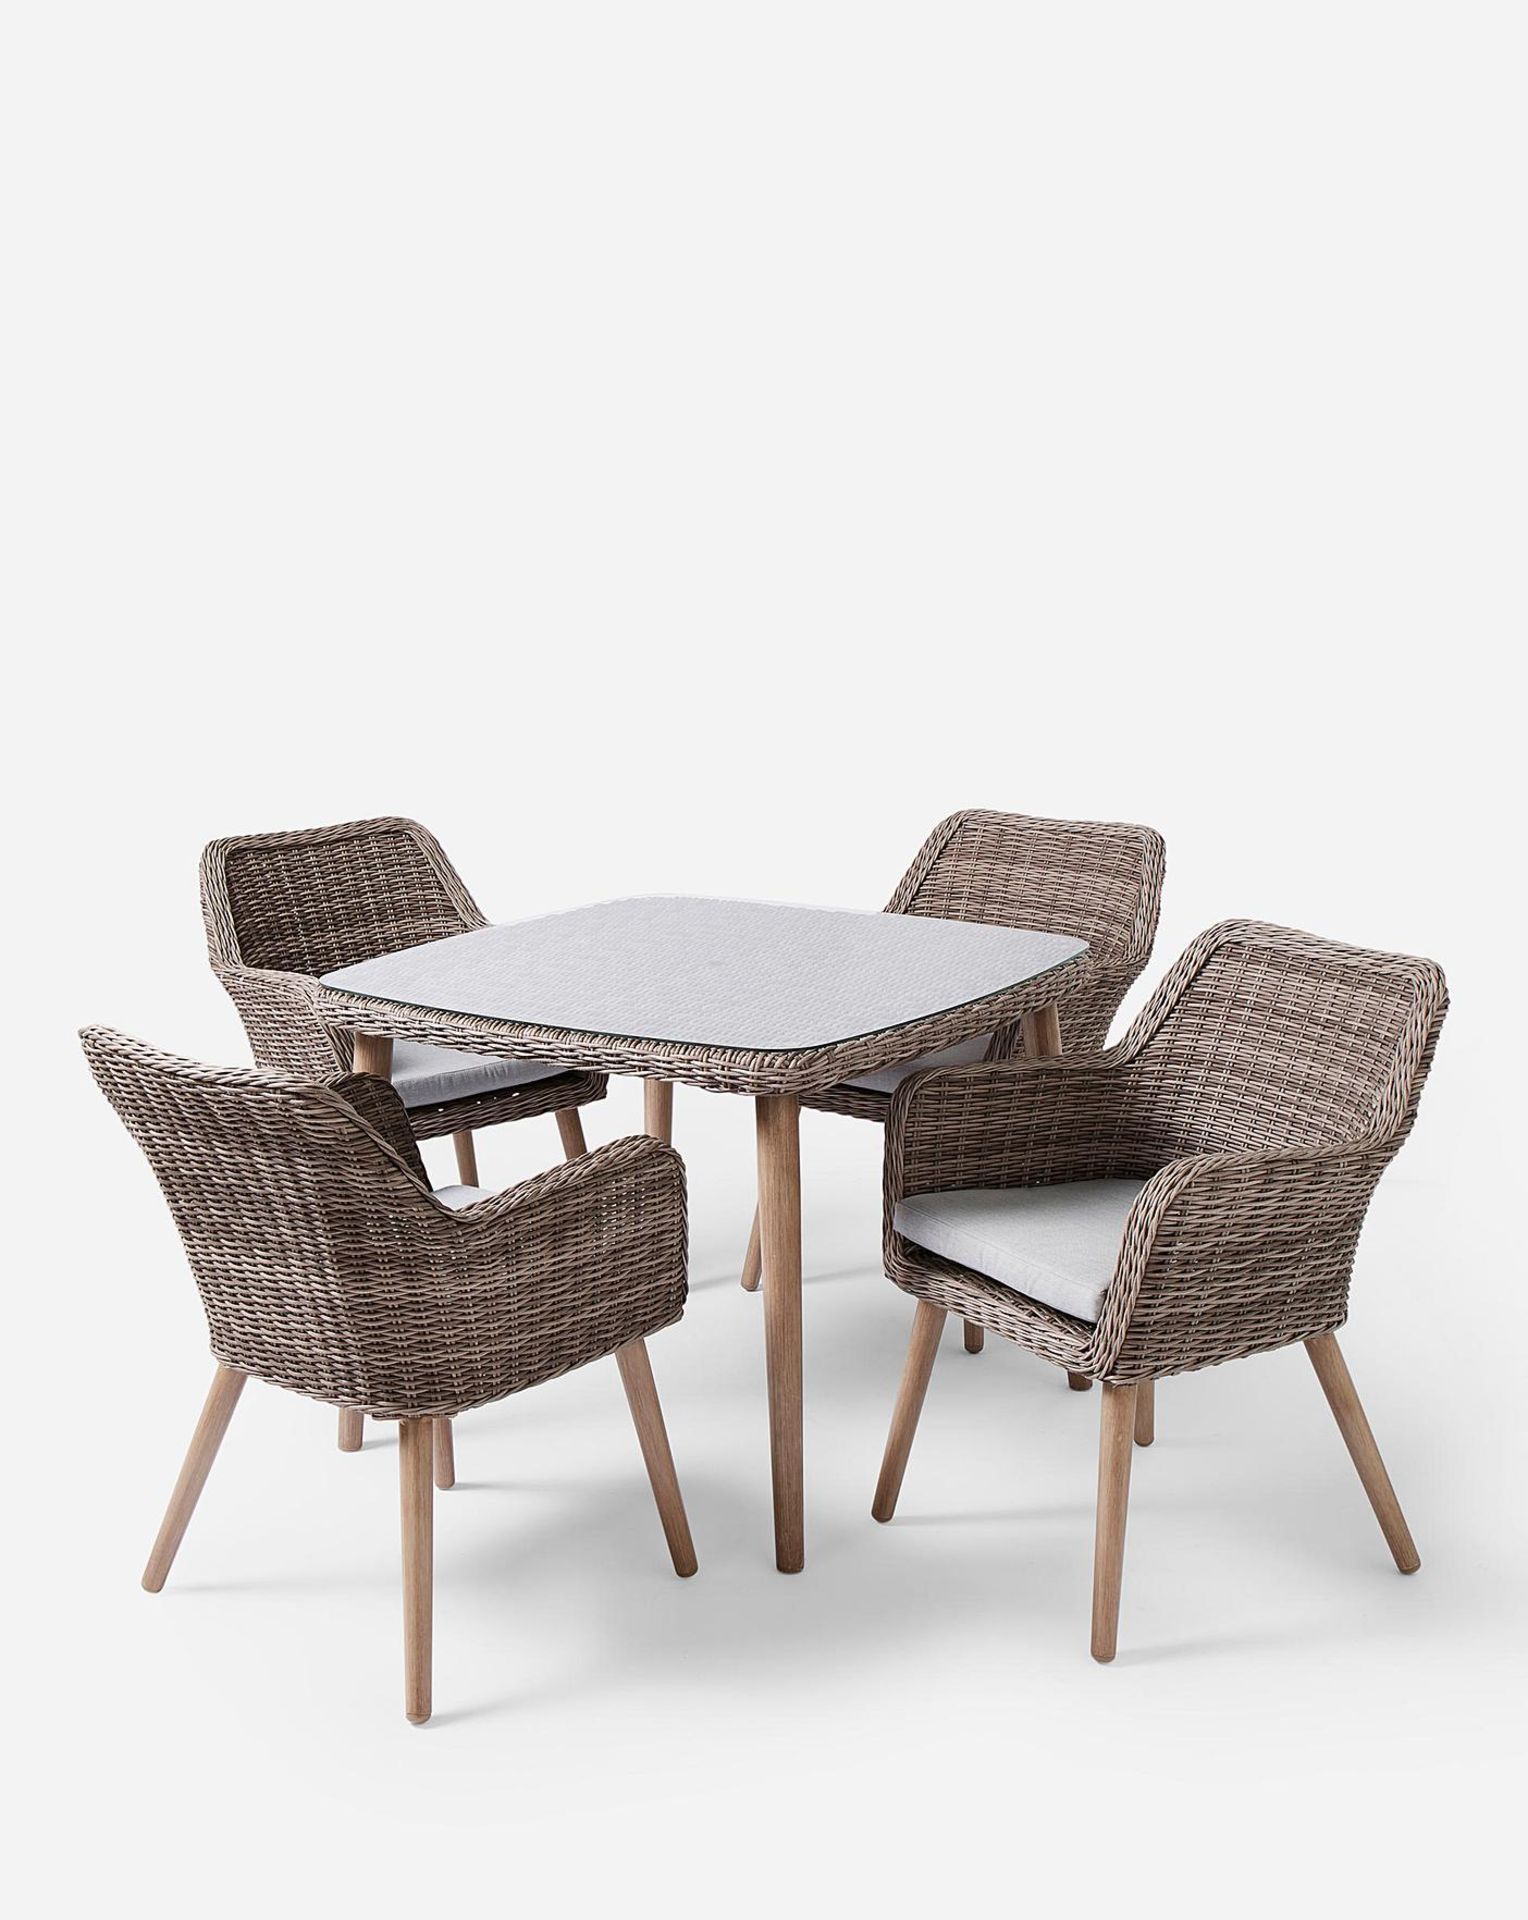 TRADE LOT 3 X BRAND NEW Maldives 4 Seater Dining Set GREY. RRP £879 EACH. This 4 seater dining set - Image 2 of 3